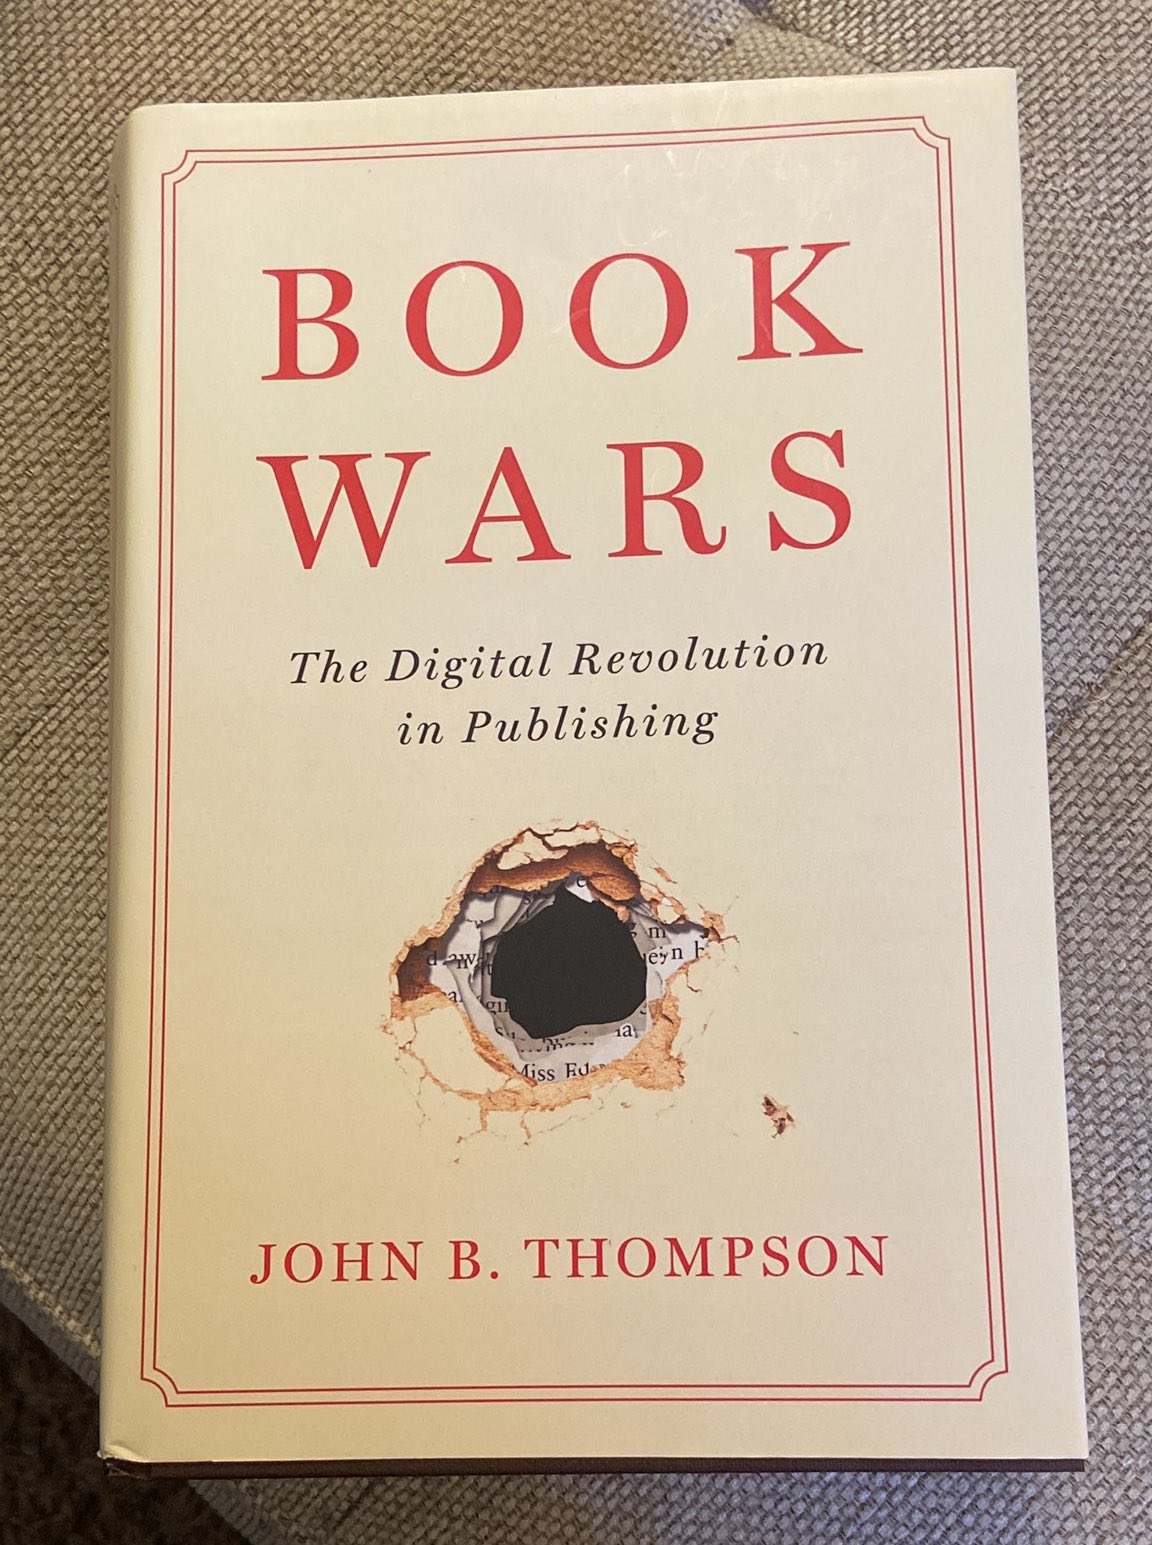 Cover Image of "Book Wars: The Digital Revolution in Publishing" by John B. Thompson.